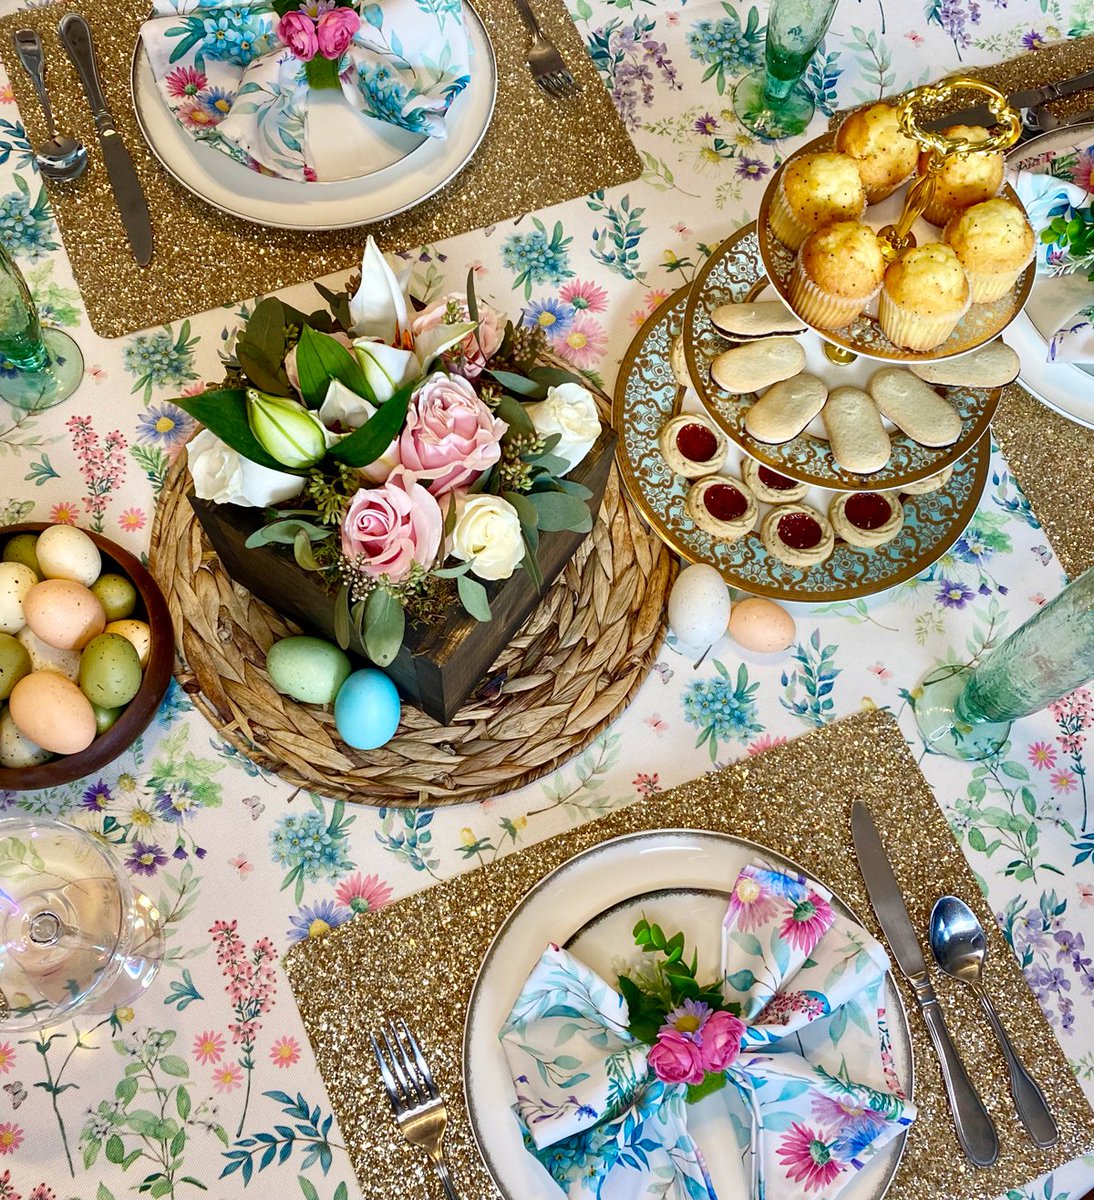 Easter table ready? 🌸🐰
Pretty pastel flowers grace the Easter table with fresh cut elegance. Order your centerpiece today!

#oliveandcocoa #eastertable #easterflowers #easter #eastersunday #flowers #floralshop #easterbrunch